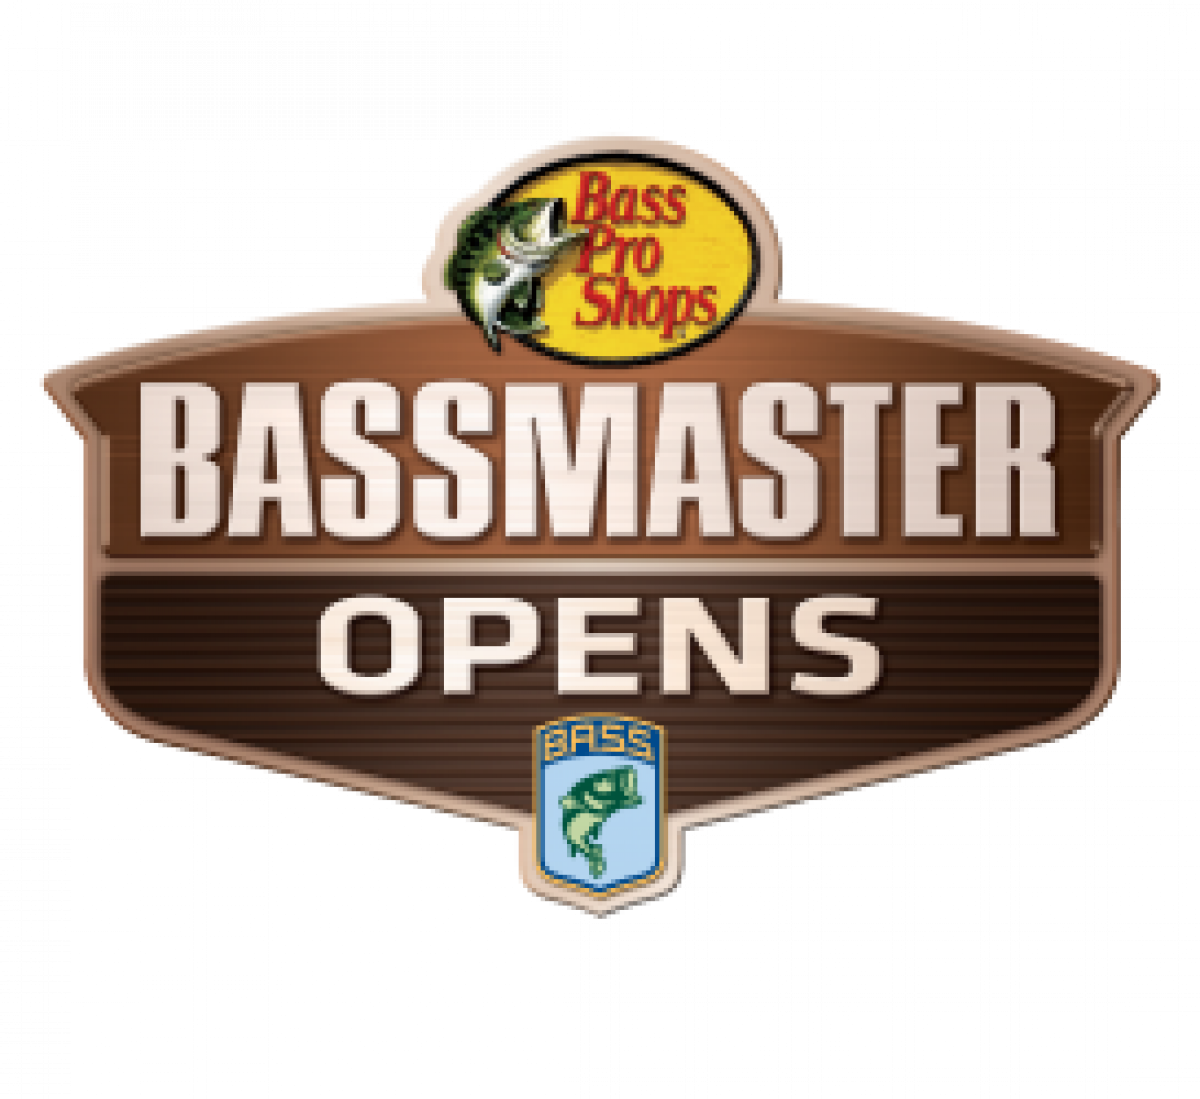 Bassmaster Open at Wolf Creek Park Oct 5th 7th City of Grove Oklahoma